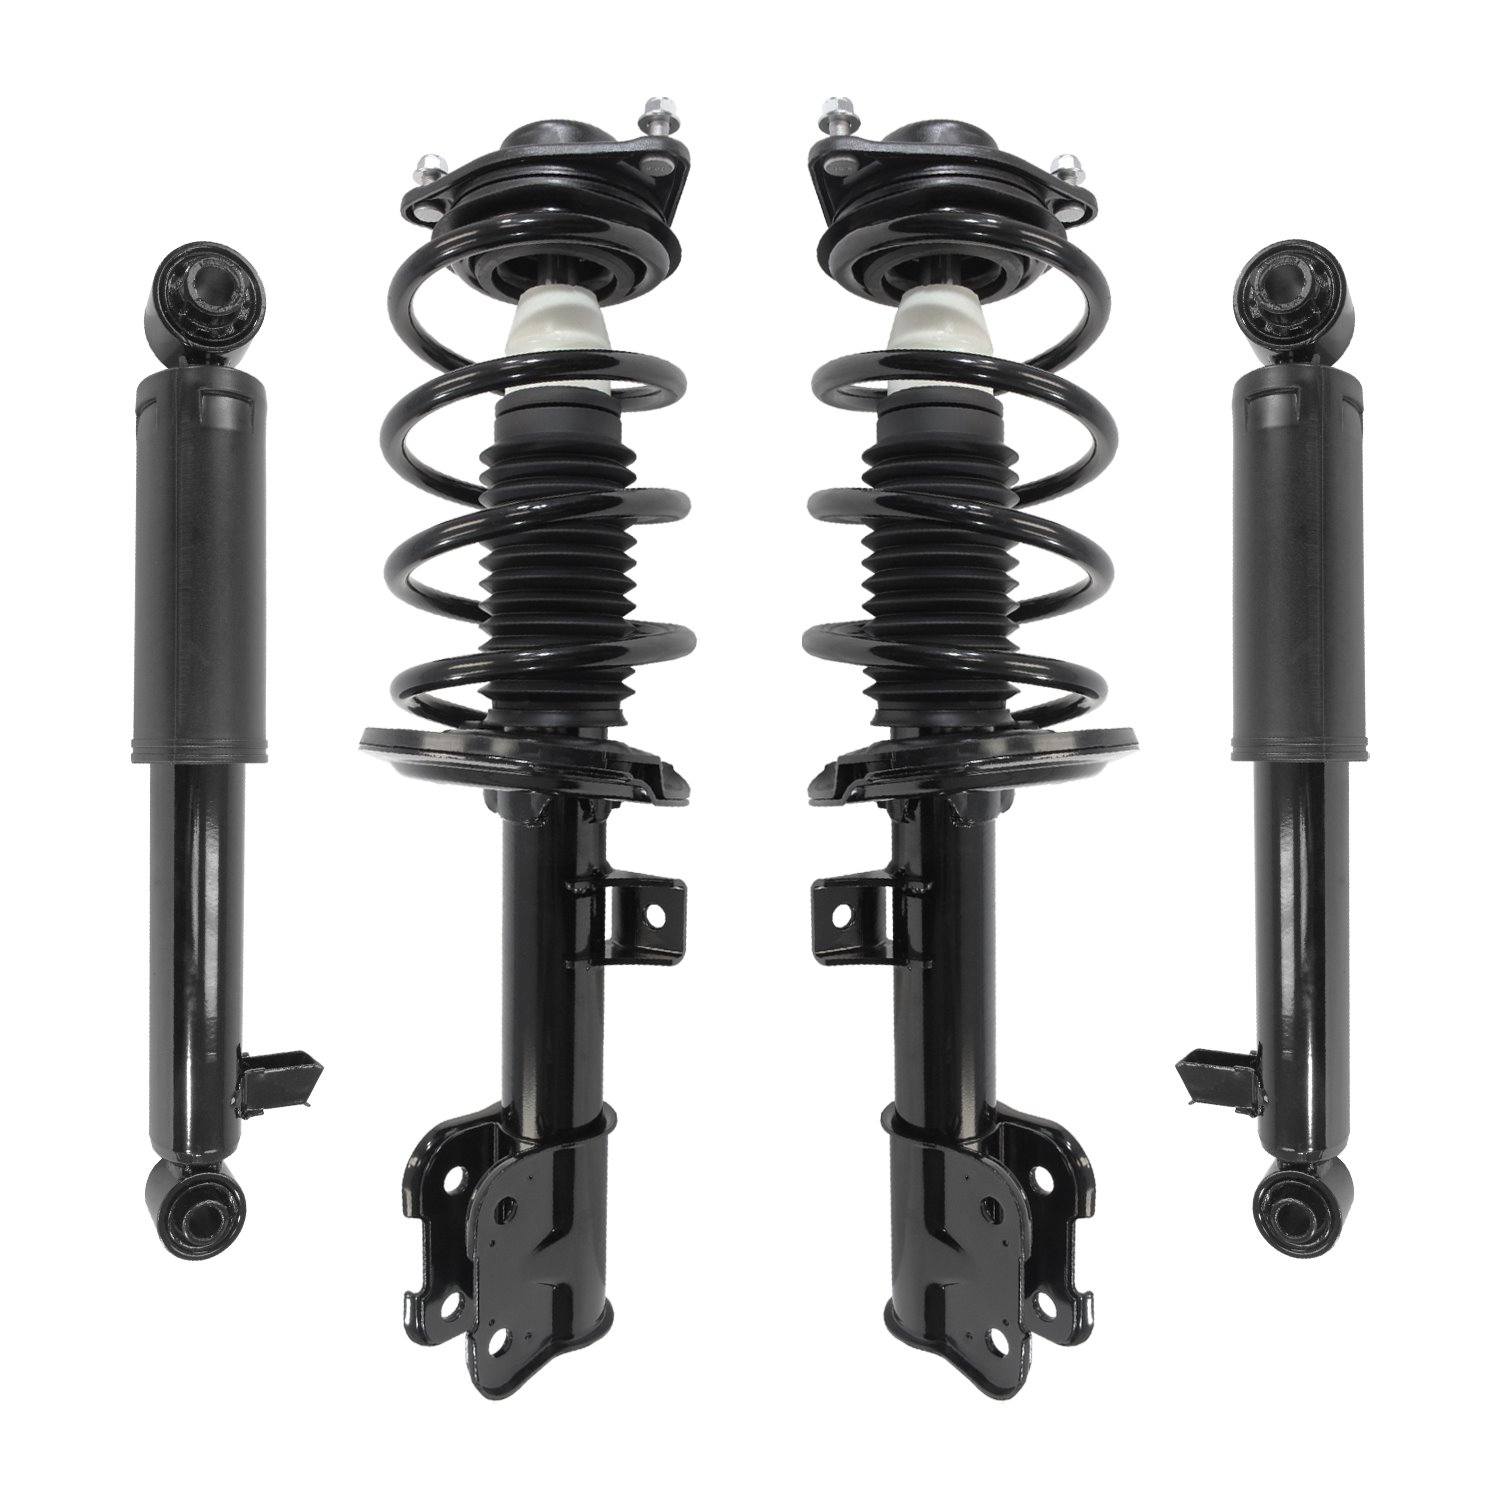 4-11365-259070-001 Front & Rear Suspension Strut & Coil Spring Assembly Fits Select Kia/Hyundai